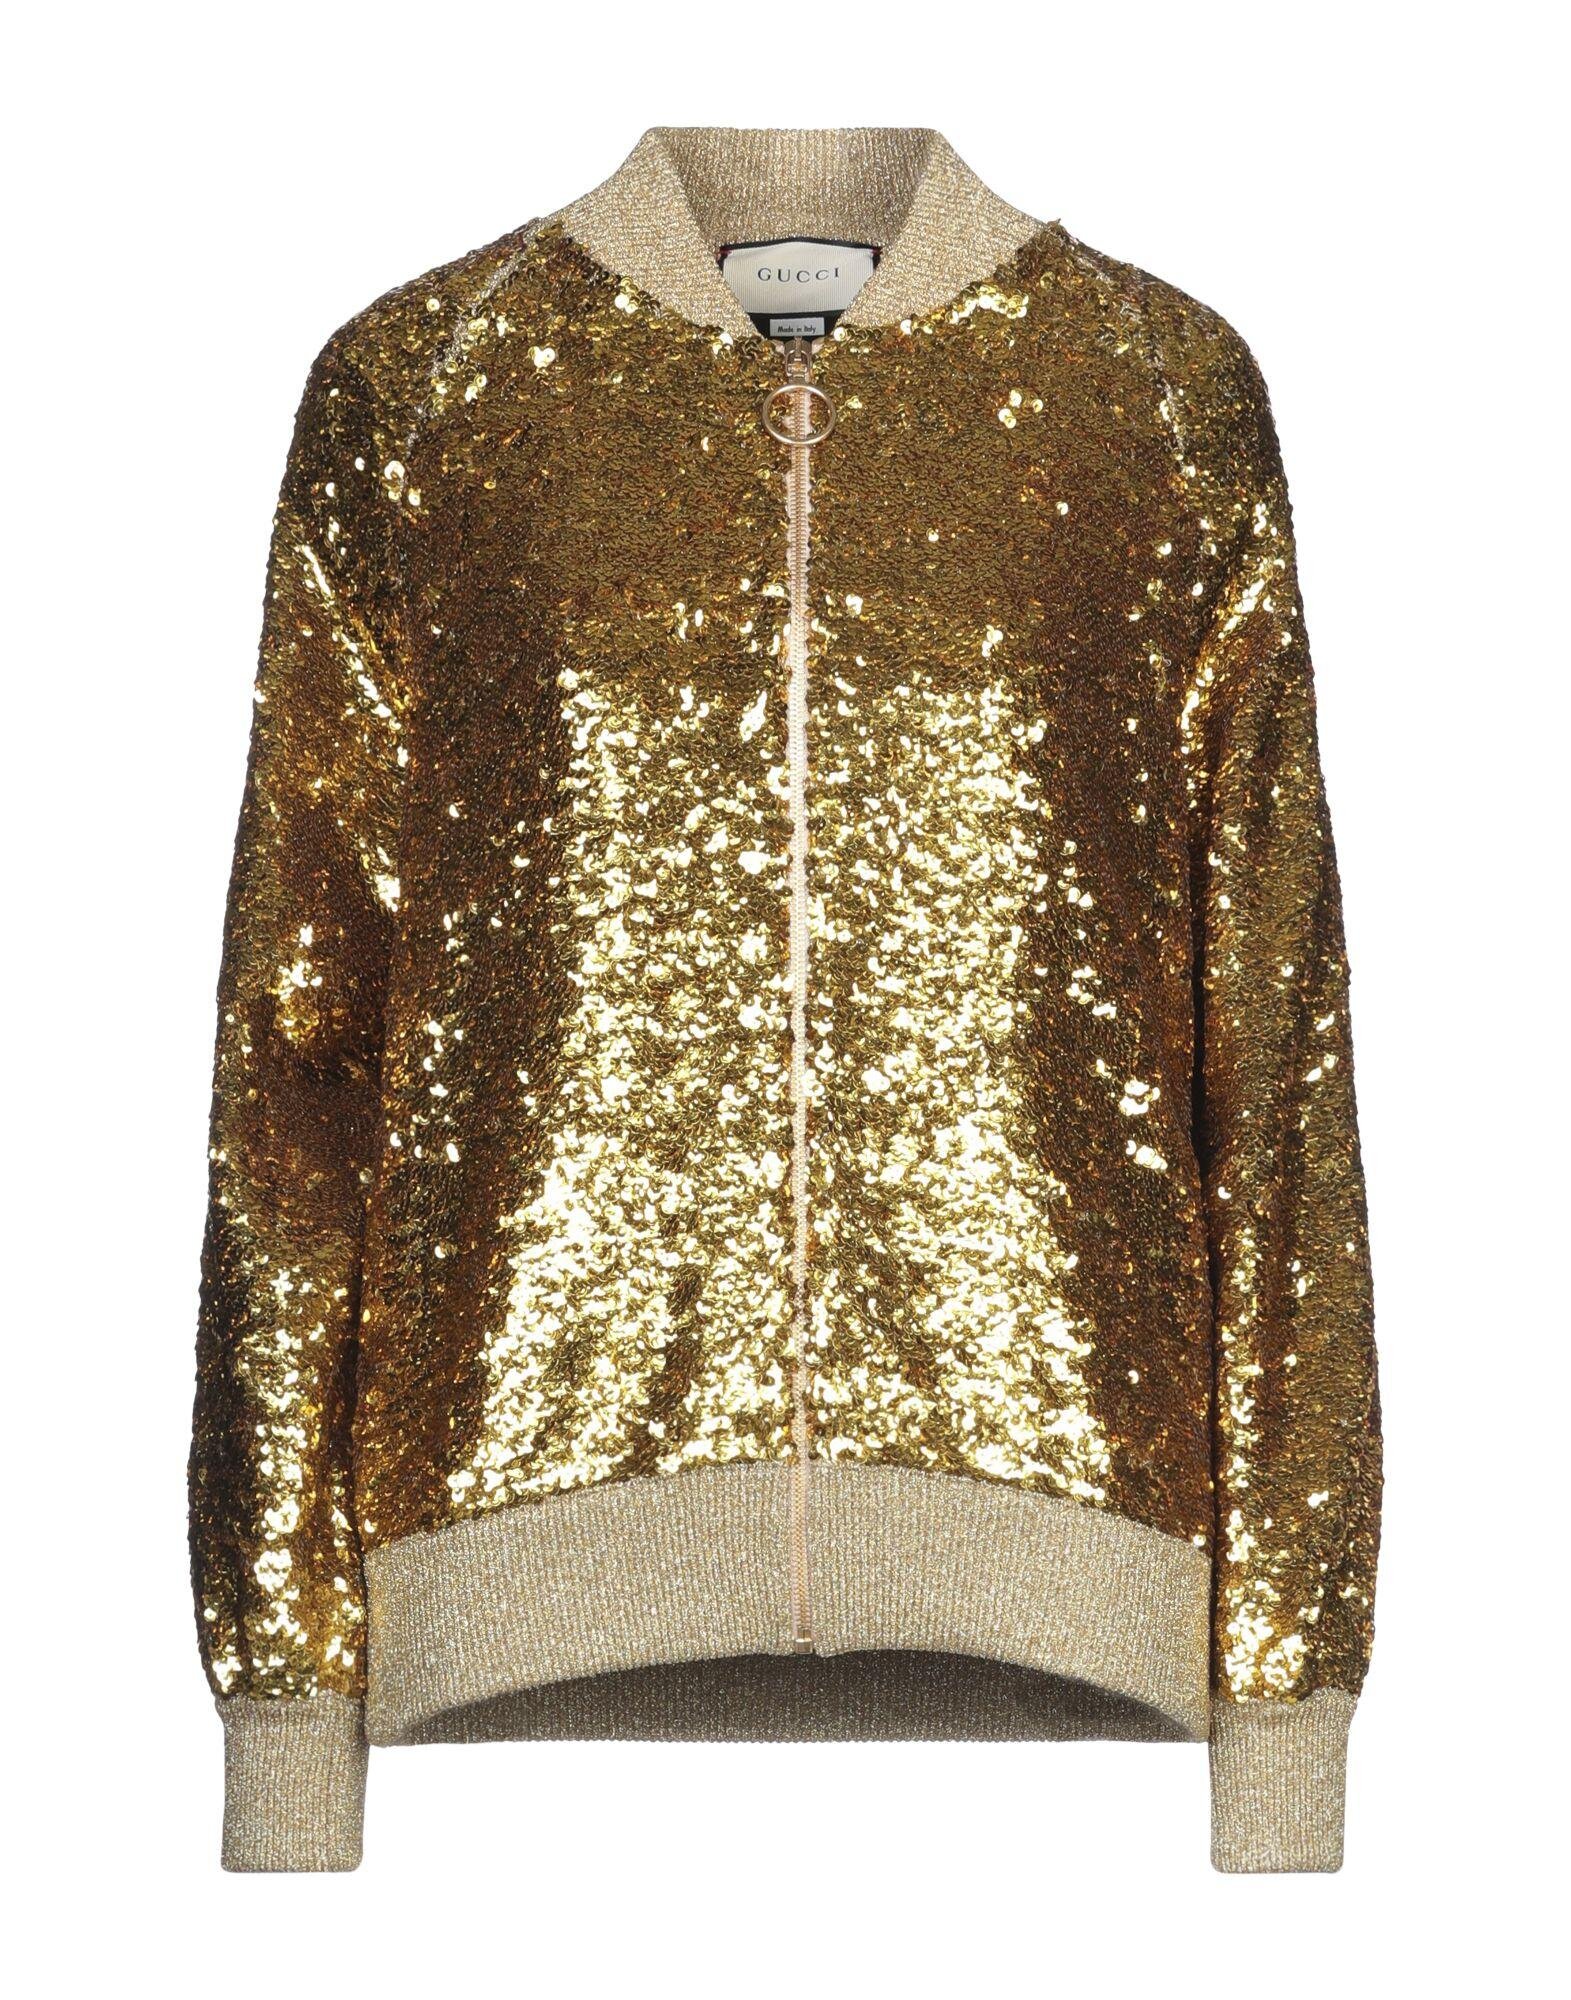 Gucci Sequin-Embellished Knit Jacket in Gold — UFO No More